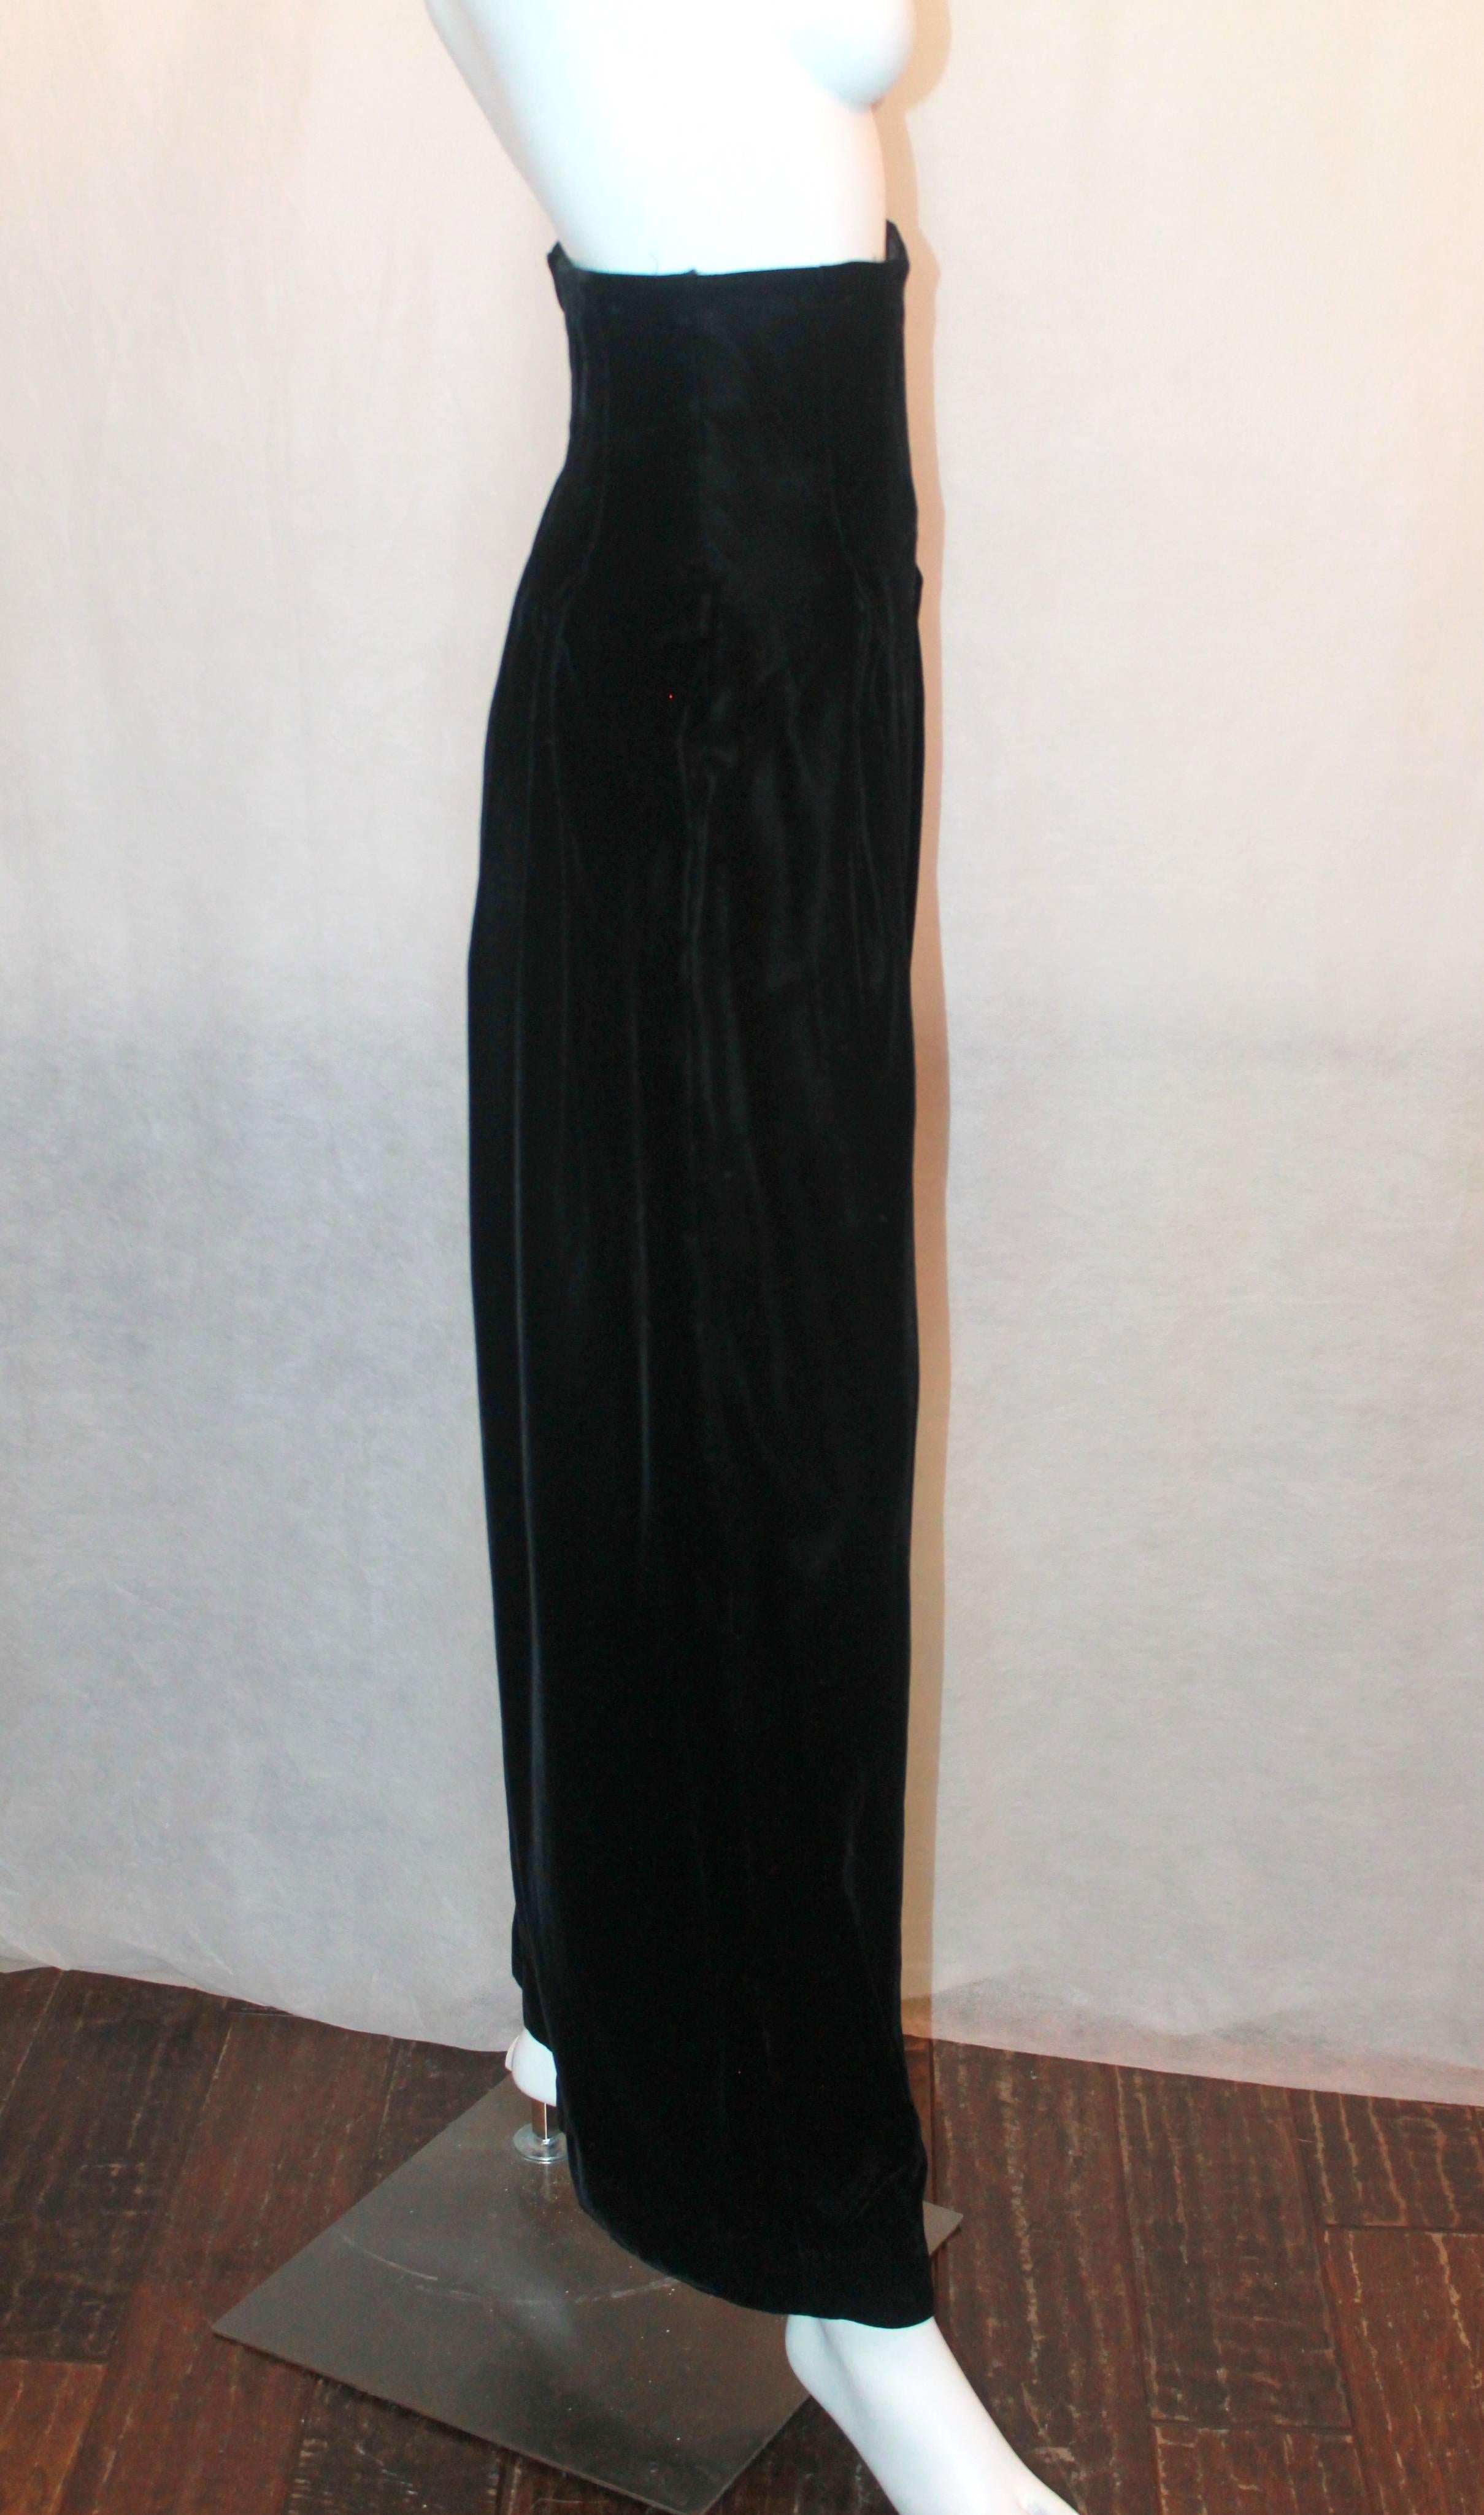 Victor Costa 1970's Vintage Black Velvet High-Waisted Palazzo Pants - 4. These pants are in excellent vintage condition and have side pockets with a back zip. There is boning inside in the waist area and pleating on the